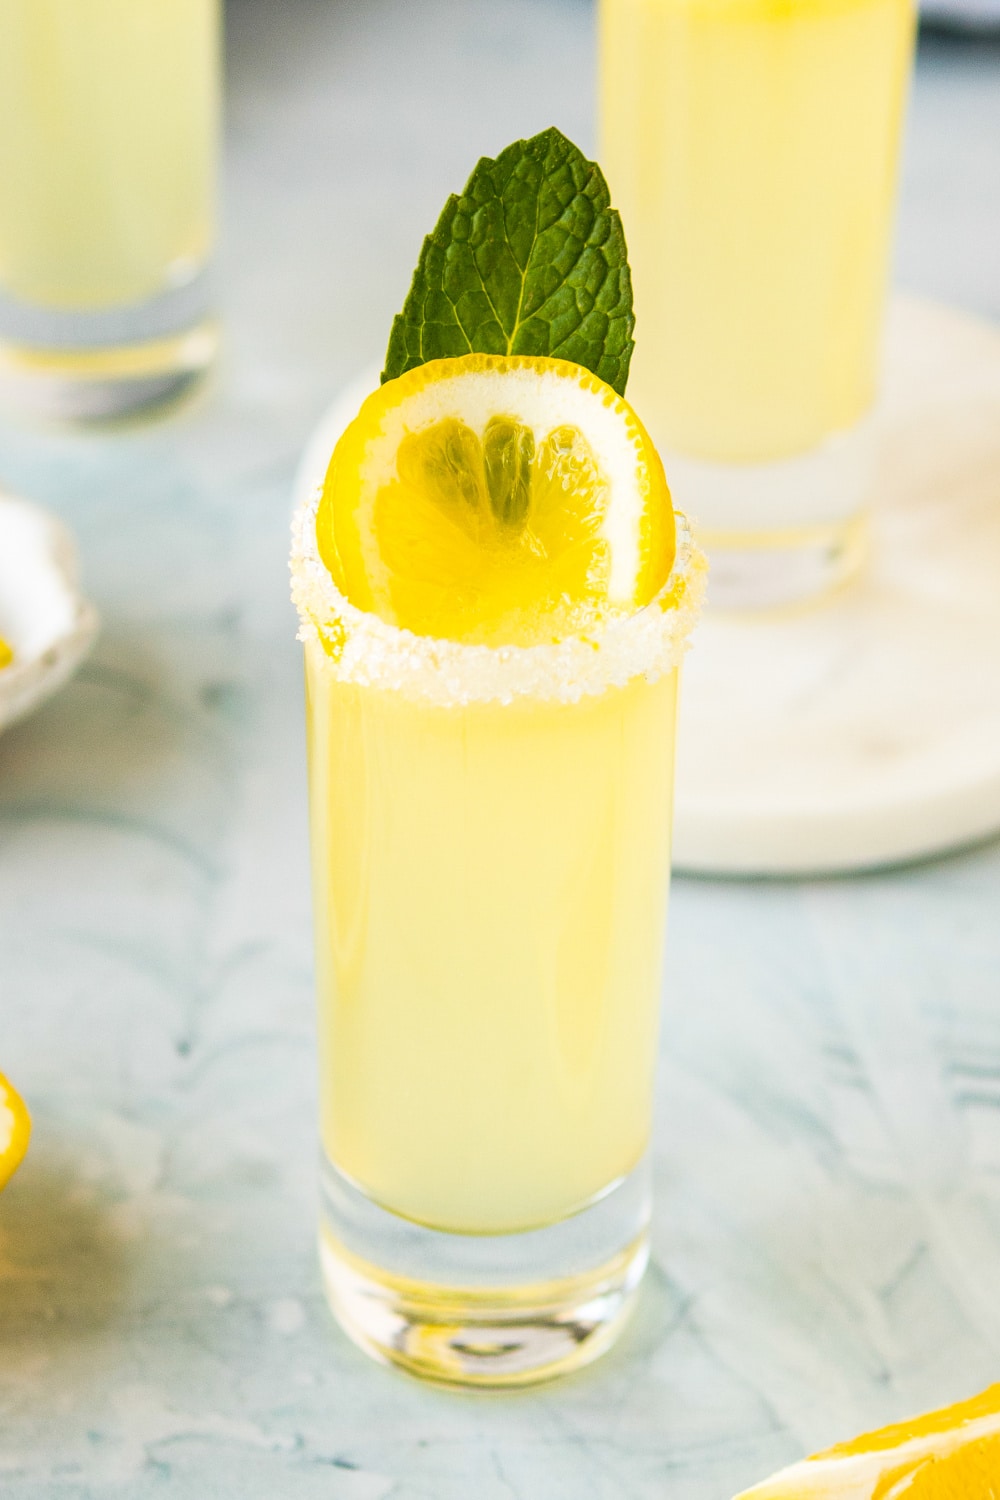 A single shot garnished with a lemon slice and a mint leaf sits on a marble countertop.